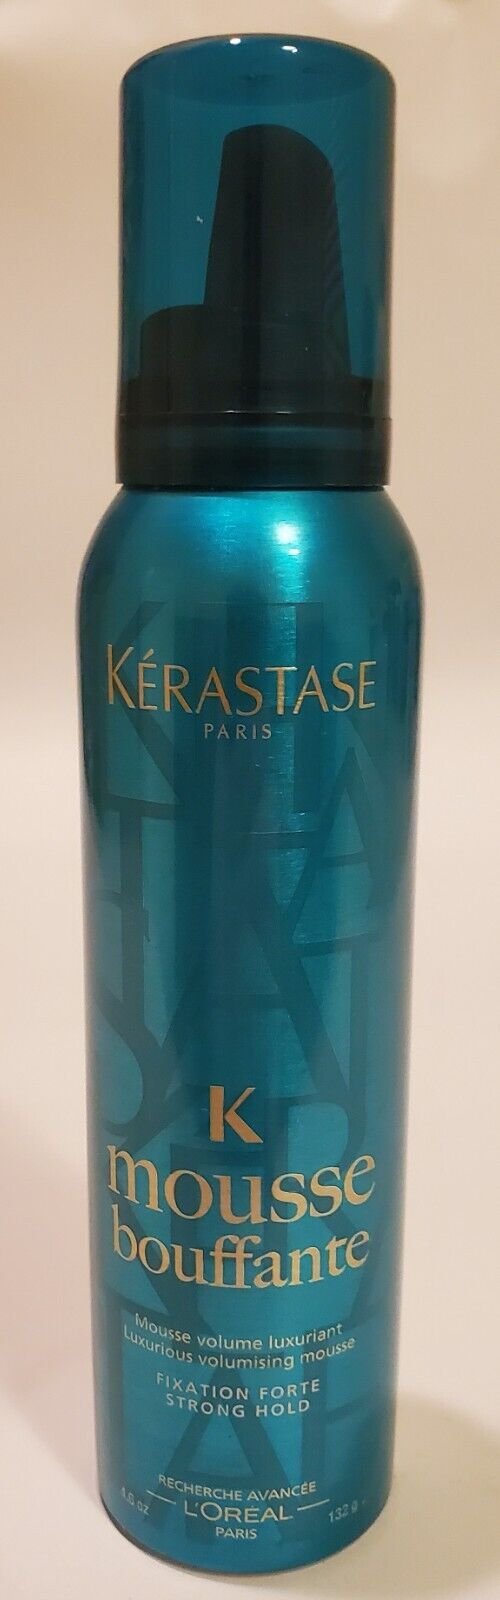 Kerastase Mousse Bouffante Strong Hold 4.6 oz 100% Authentic Buy With Confidence